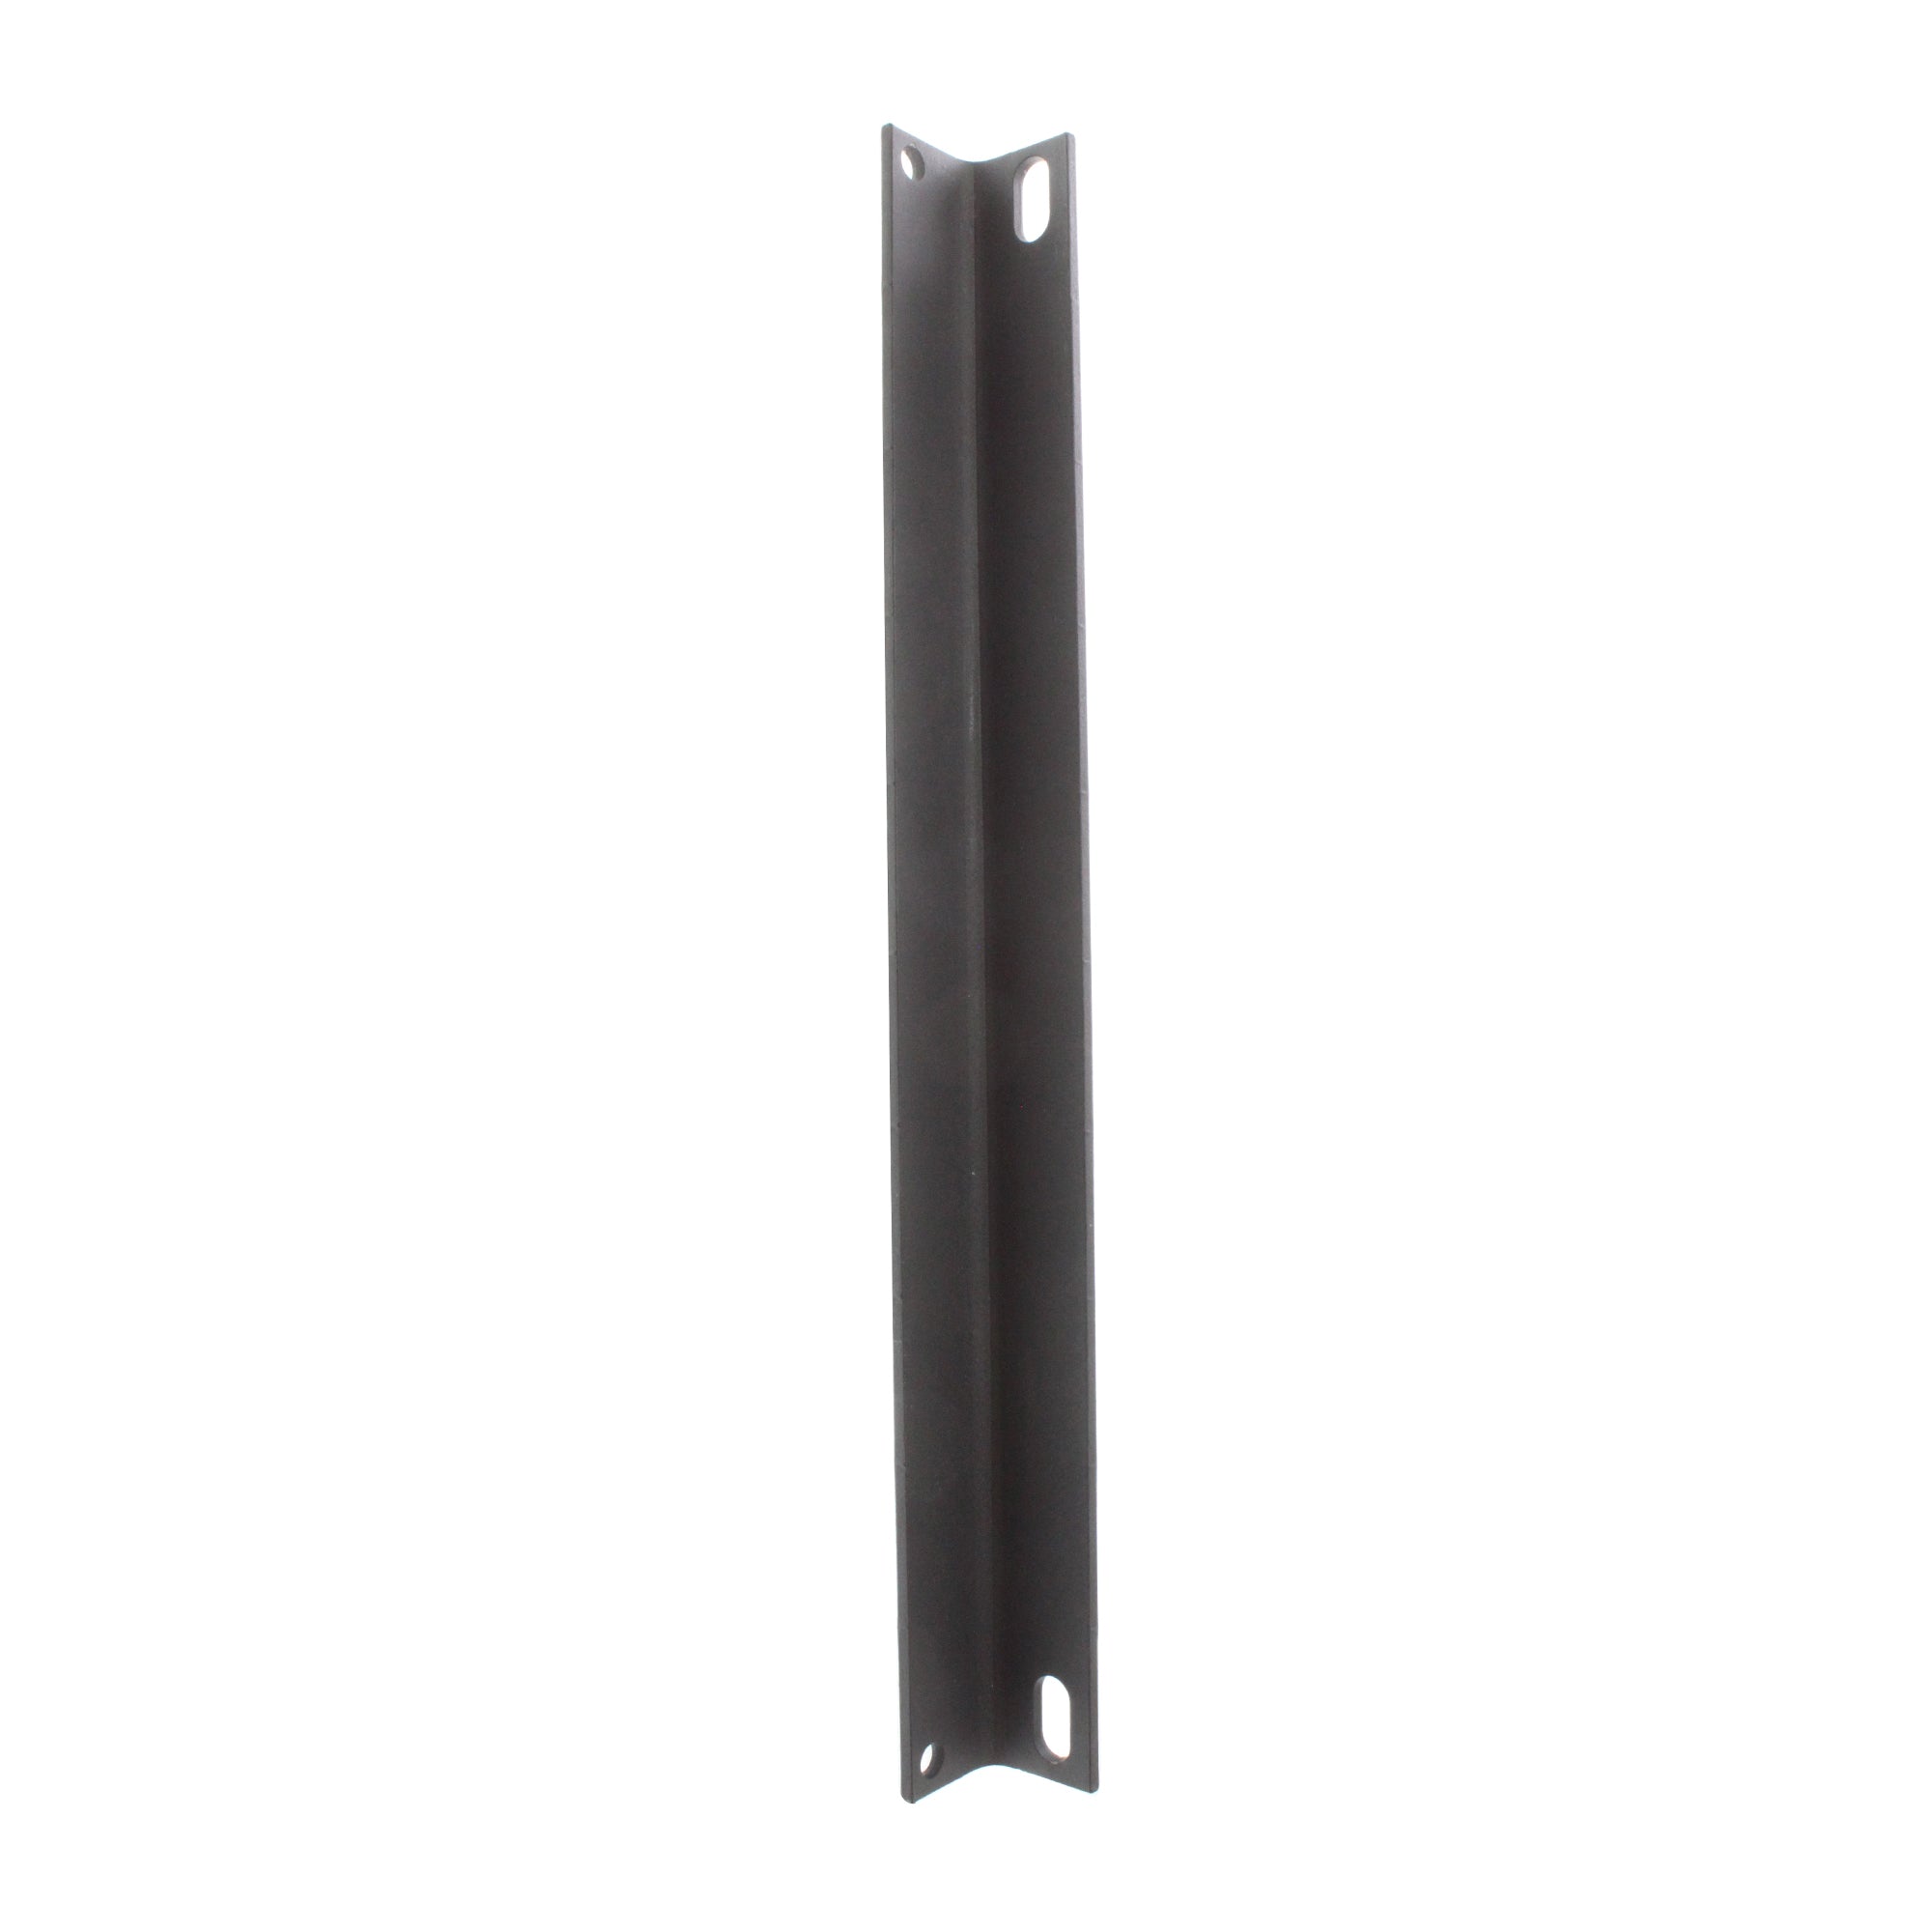 B-Line Systems, COOPER B-LINE SB211318FB RUNWAY WALL ANGLE SUPPORT KIT, BLACK, 18-INCH